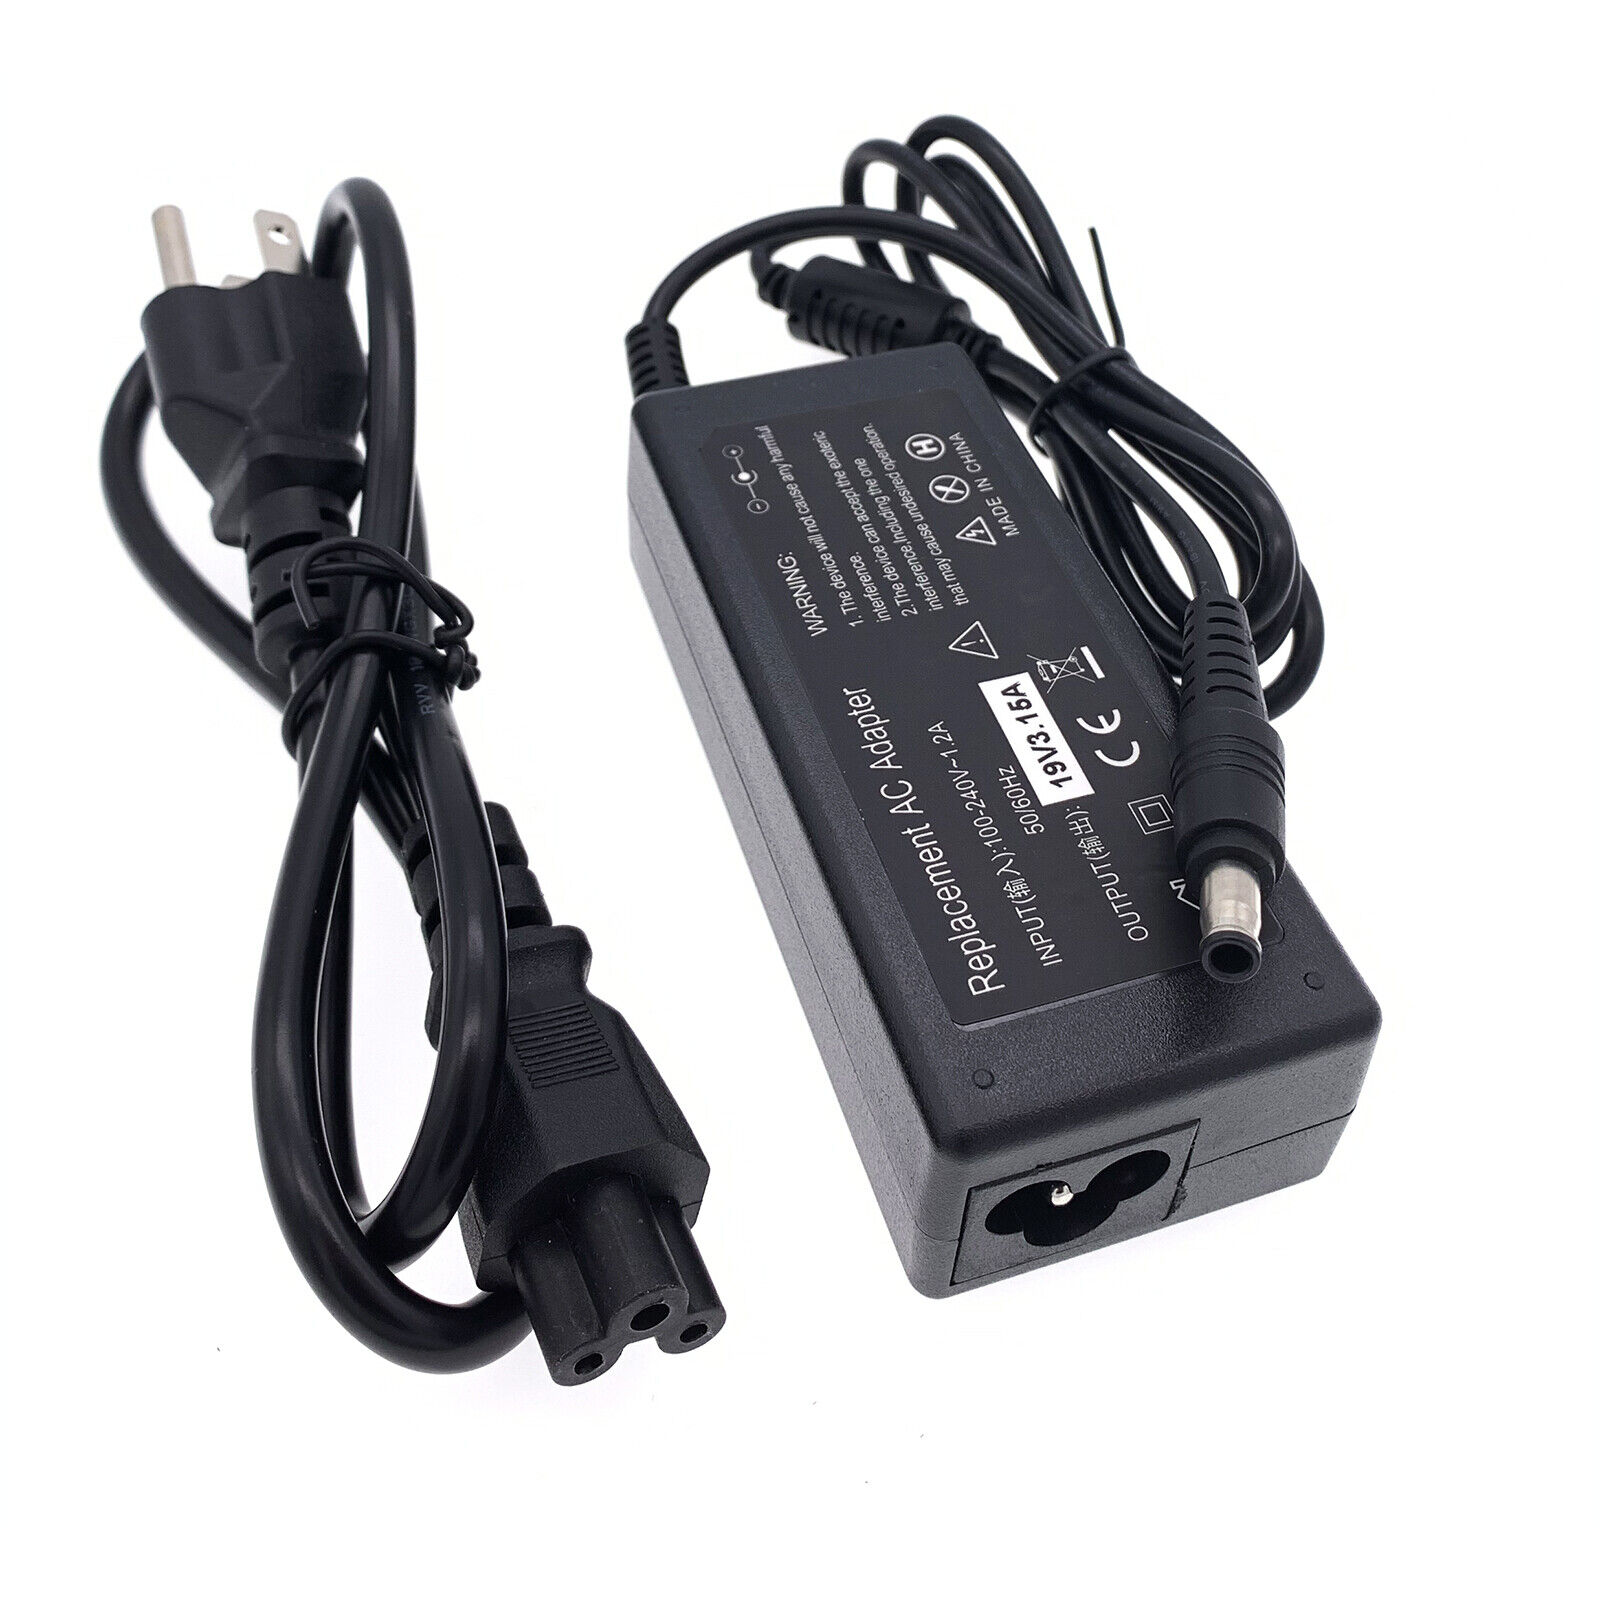 AC Adapter Charger For Samsung RV511 R540 AD-6019R PA-1600-66 CPA09-002A /-004A